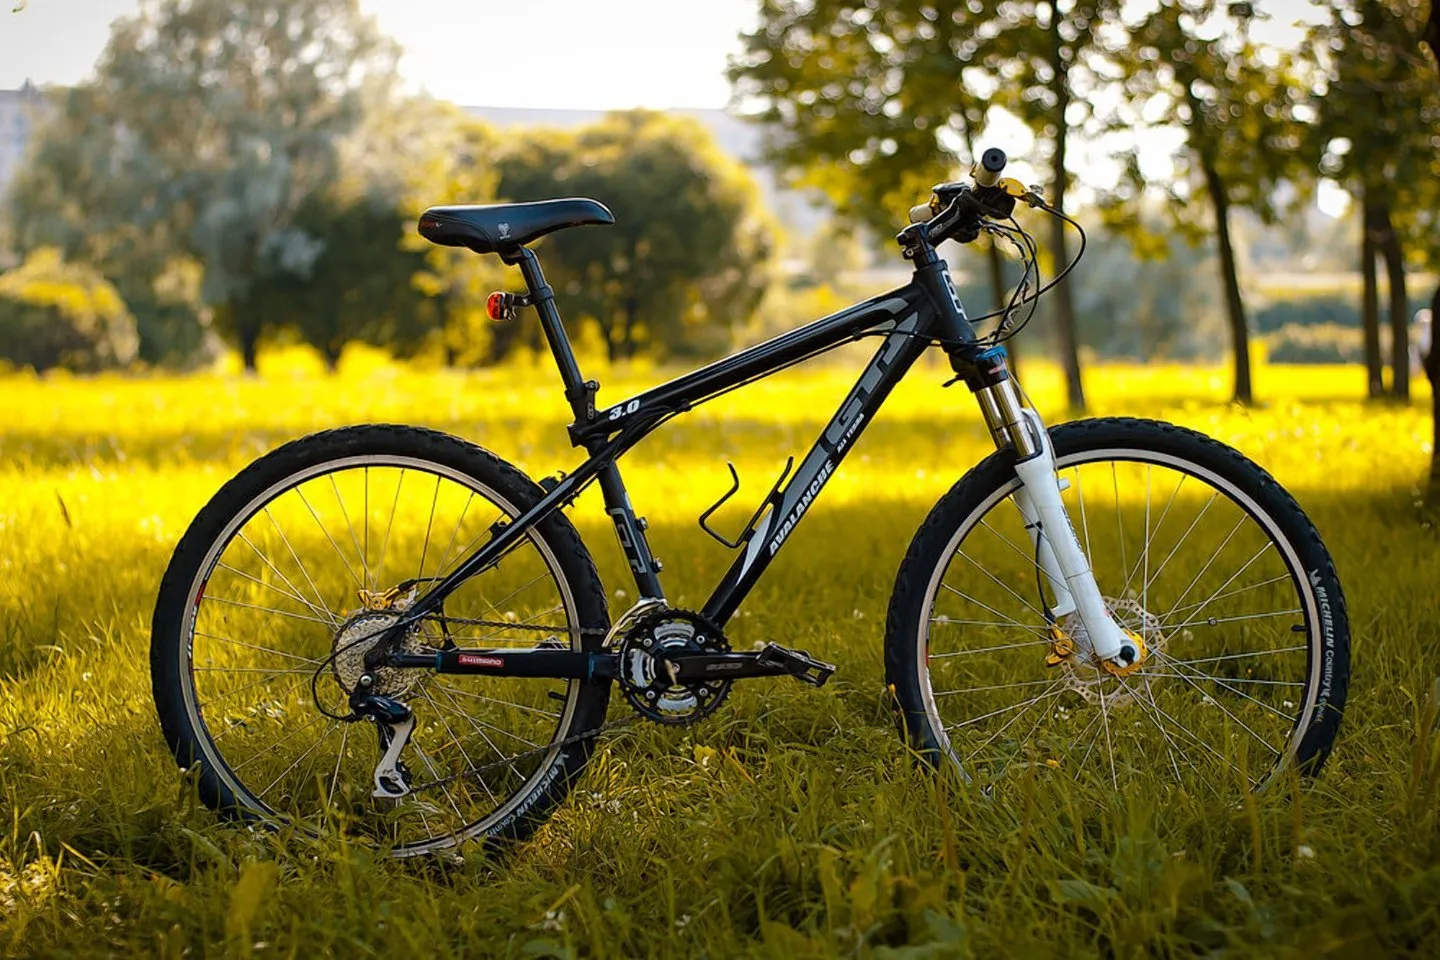 Gear Up for Adventure: Premier Tourist Equipment for Bicycle Trips